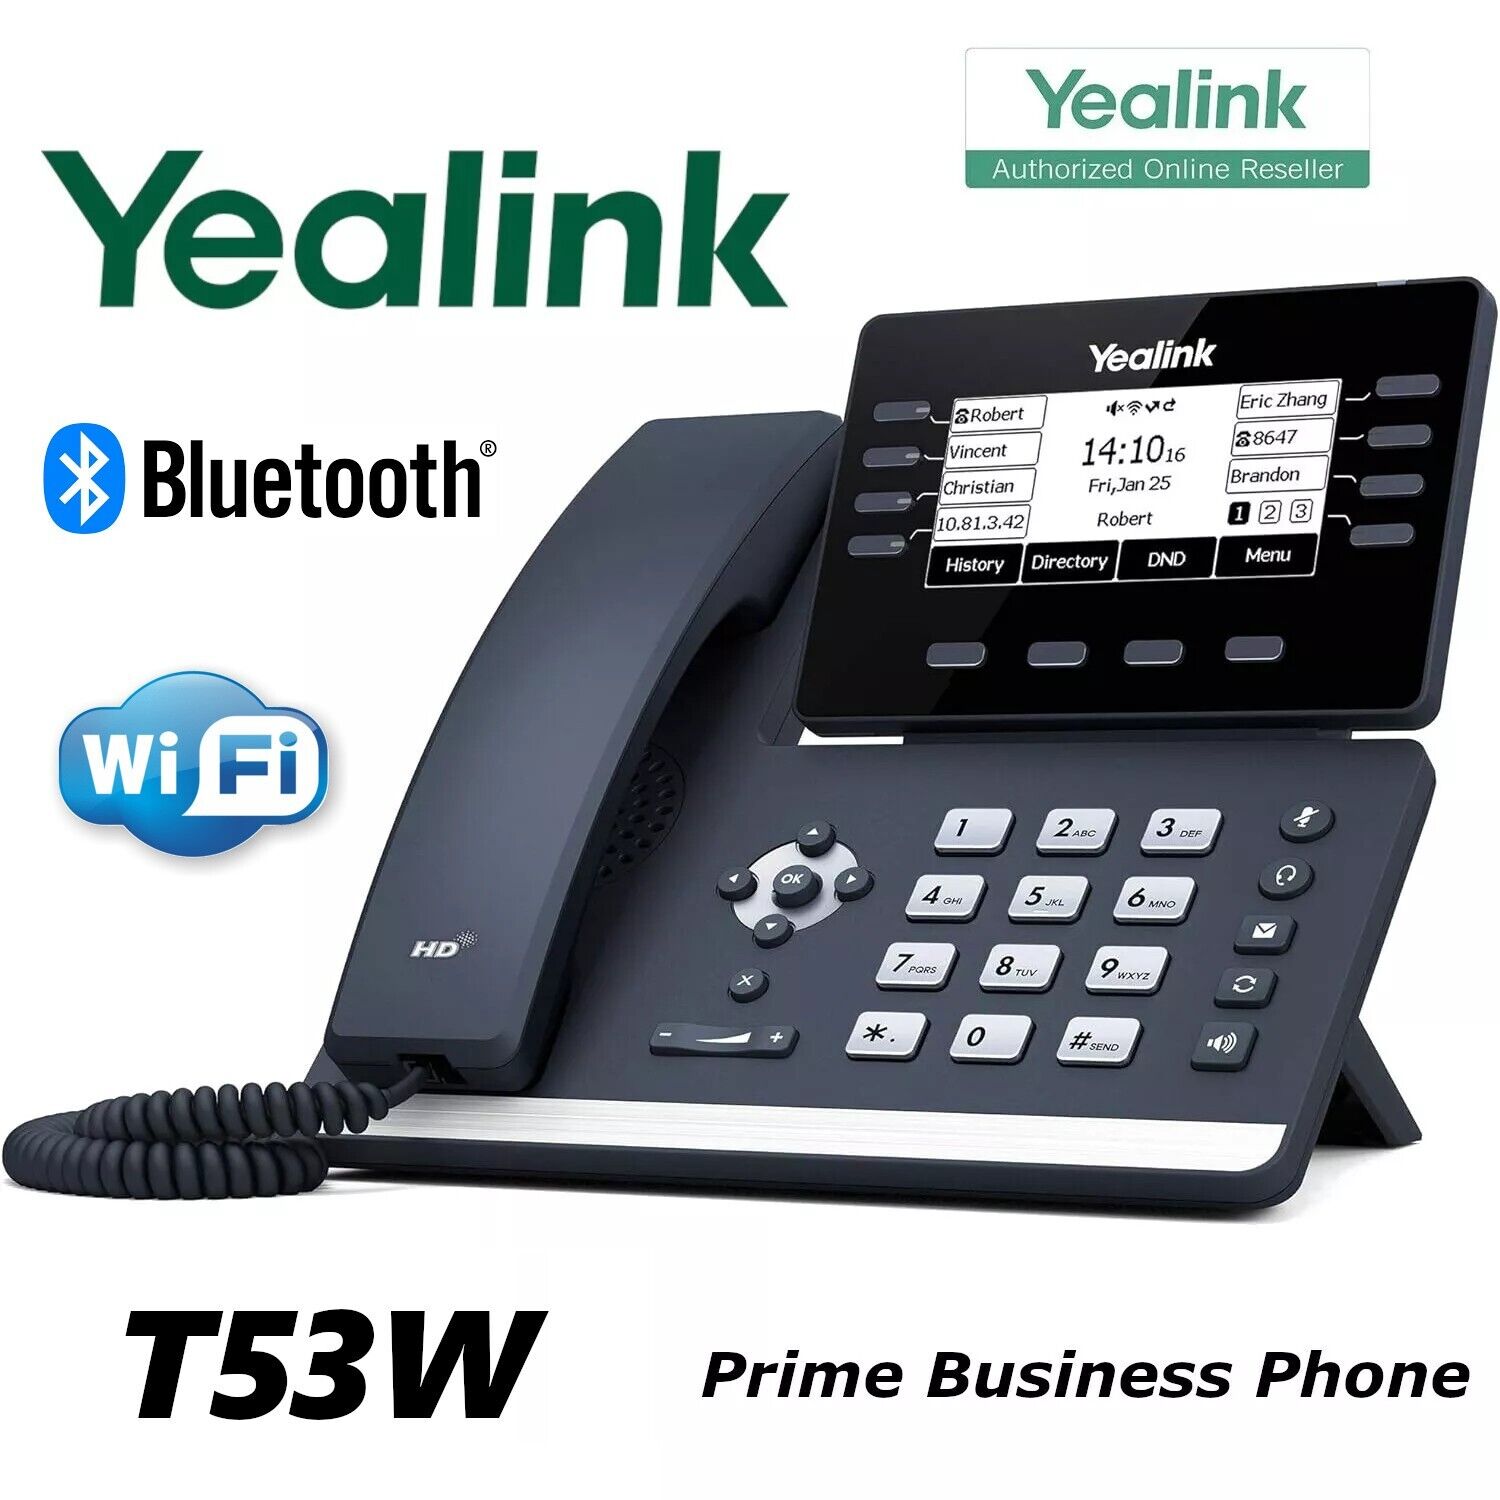 Yealink SIP-T53W Prime Business Phone T53W Entry Level Bluetooth & WiFi